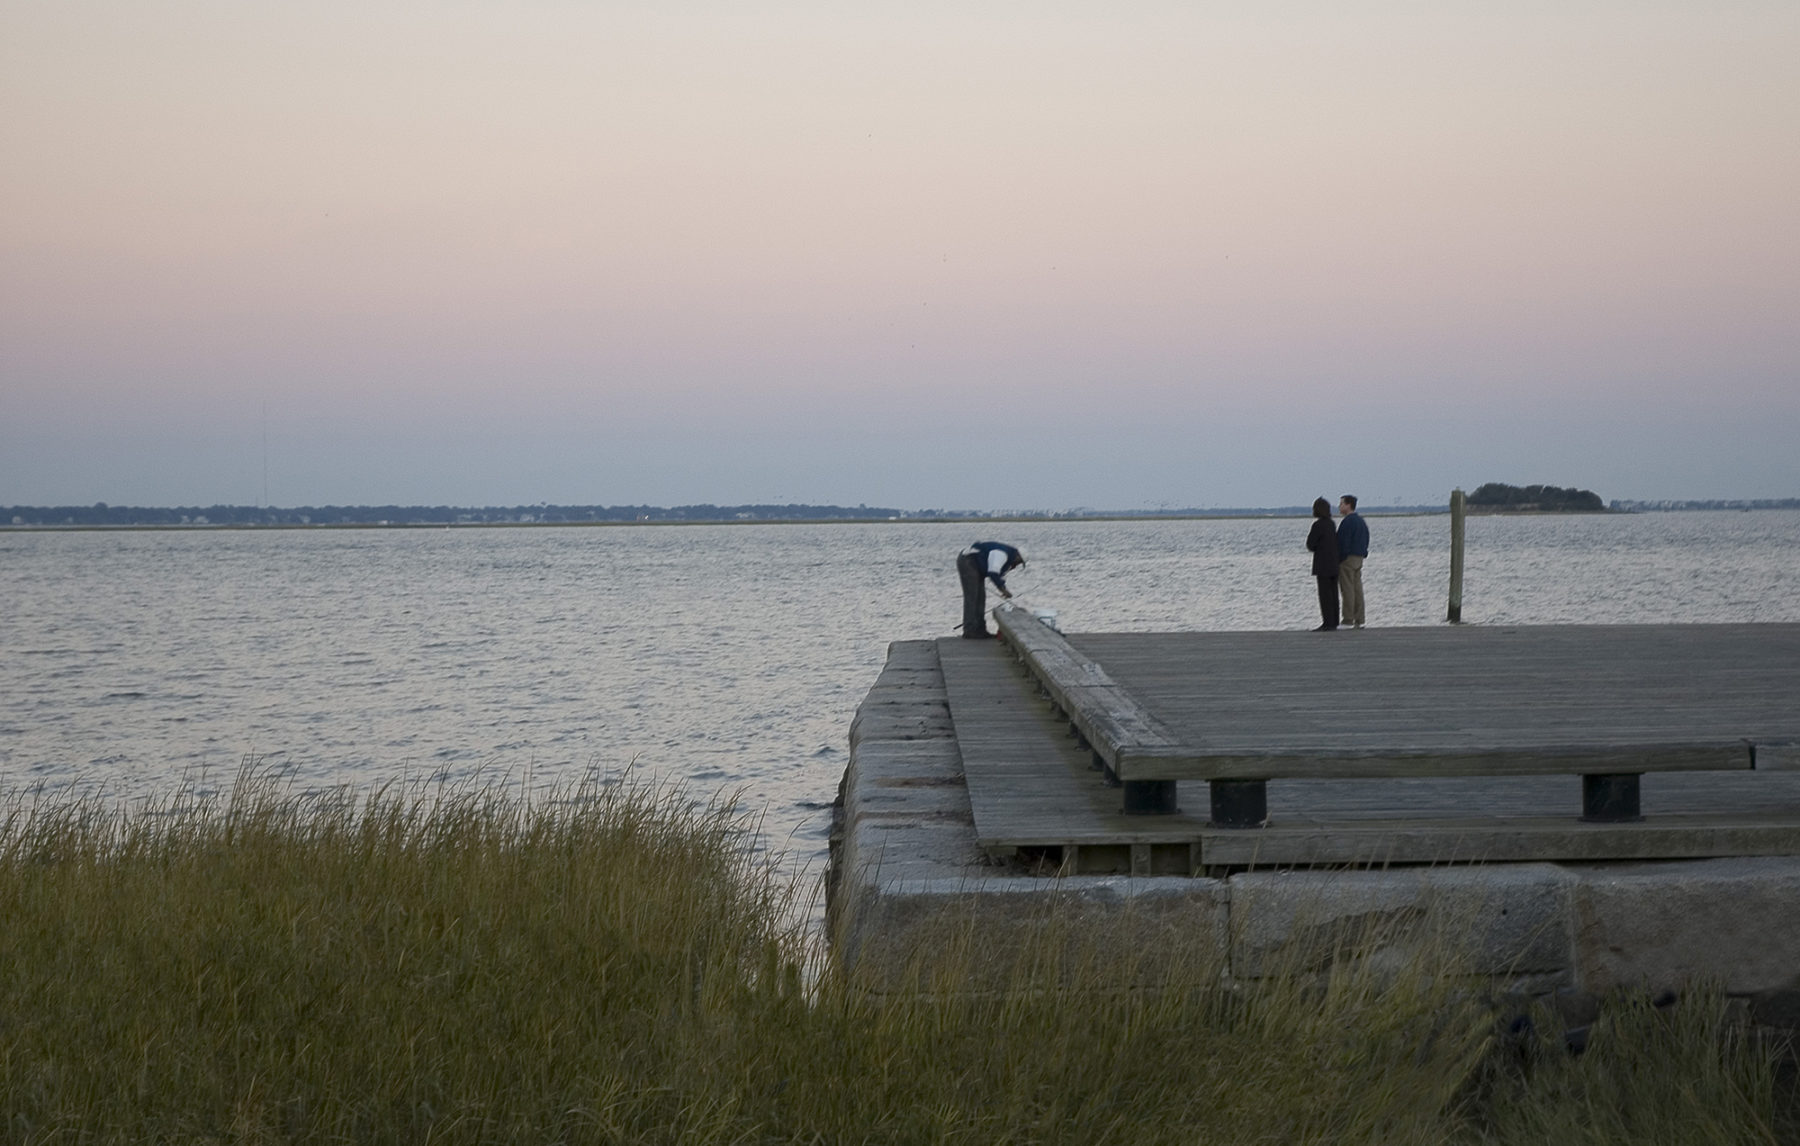 Photo of people on dock at water's edge